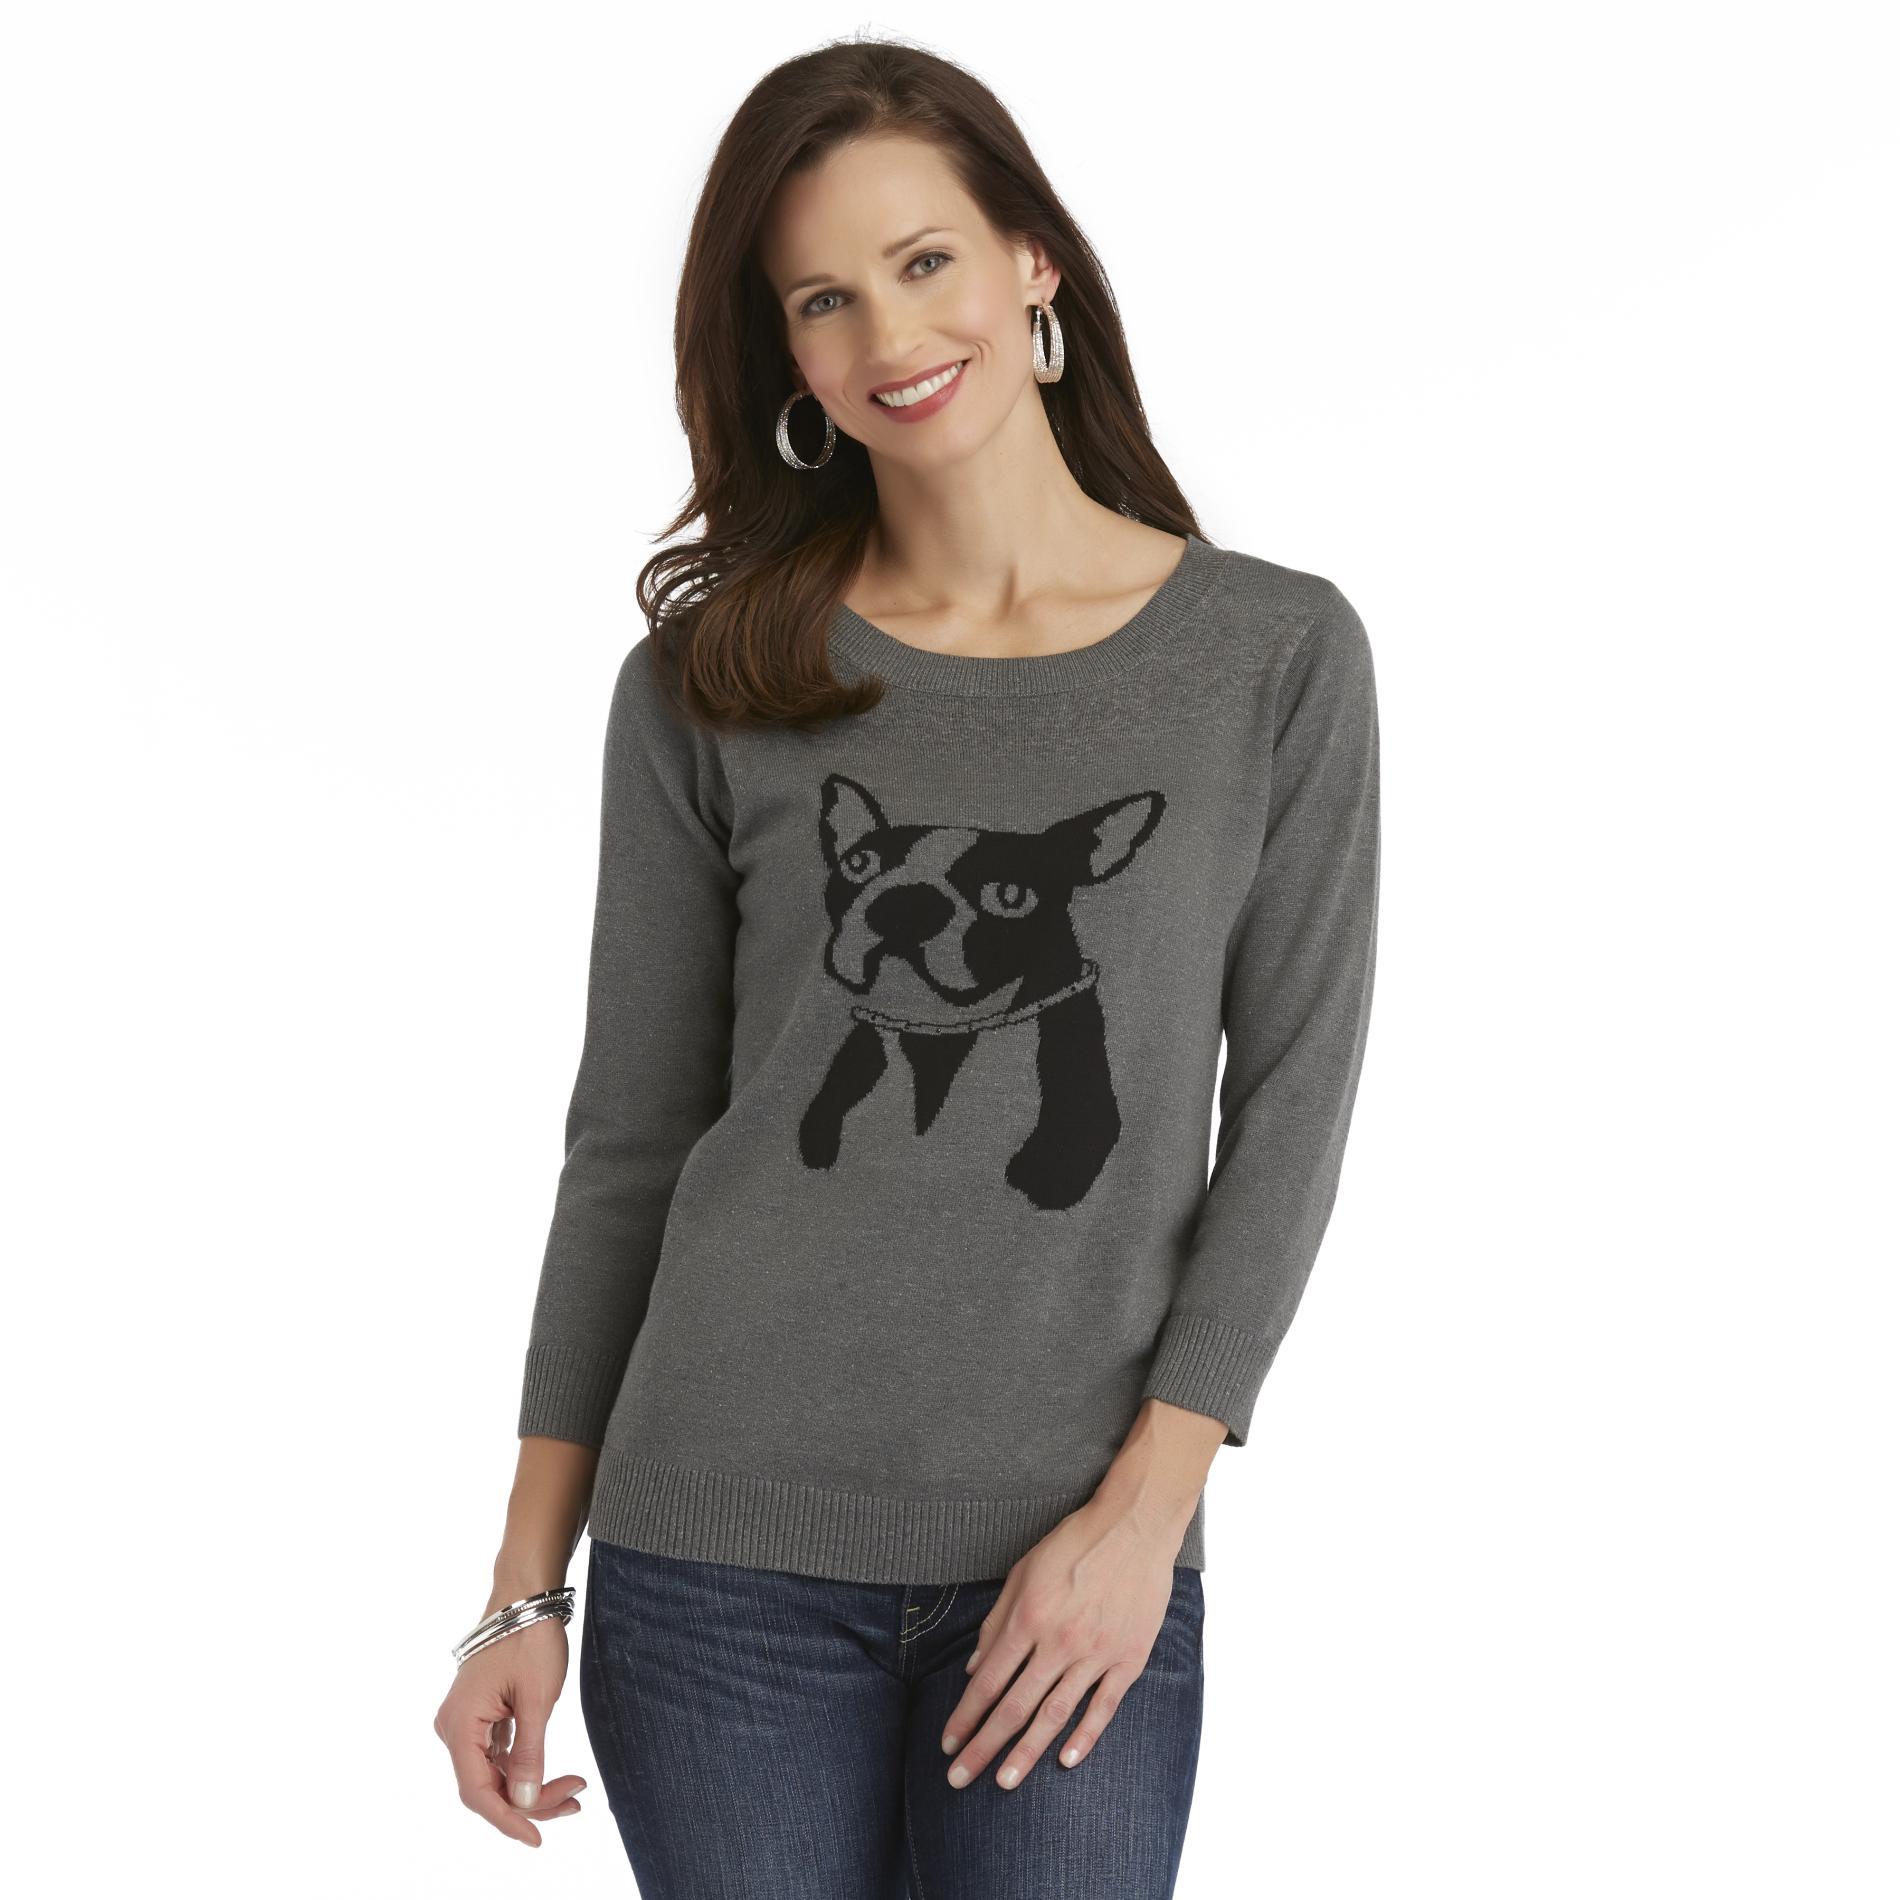 Jaclyn Smith Women's Graphic Knit Sweater - Dog